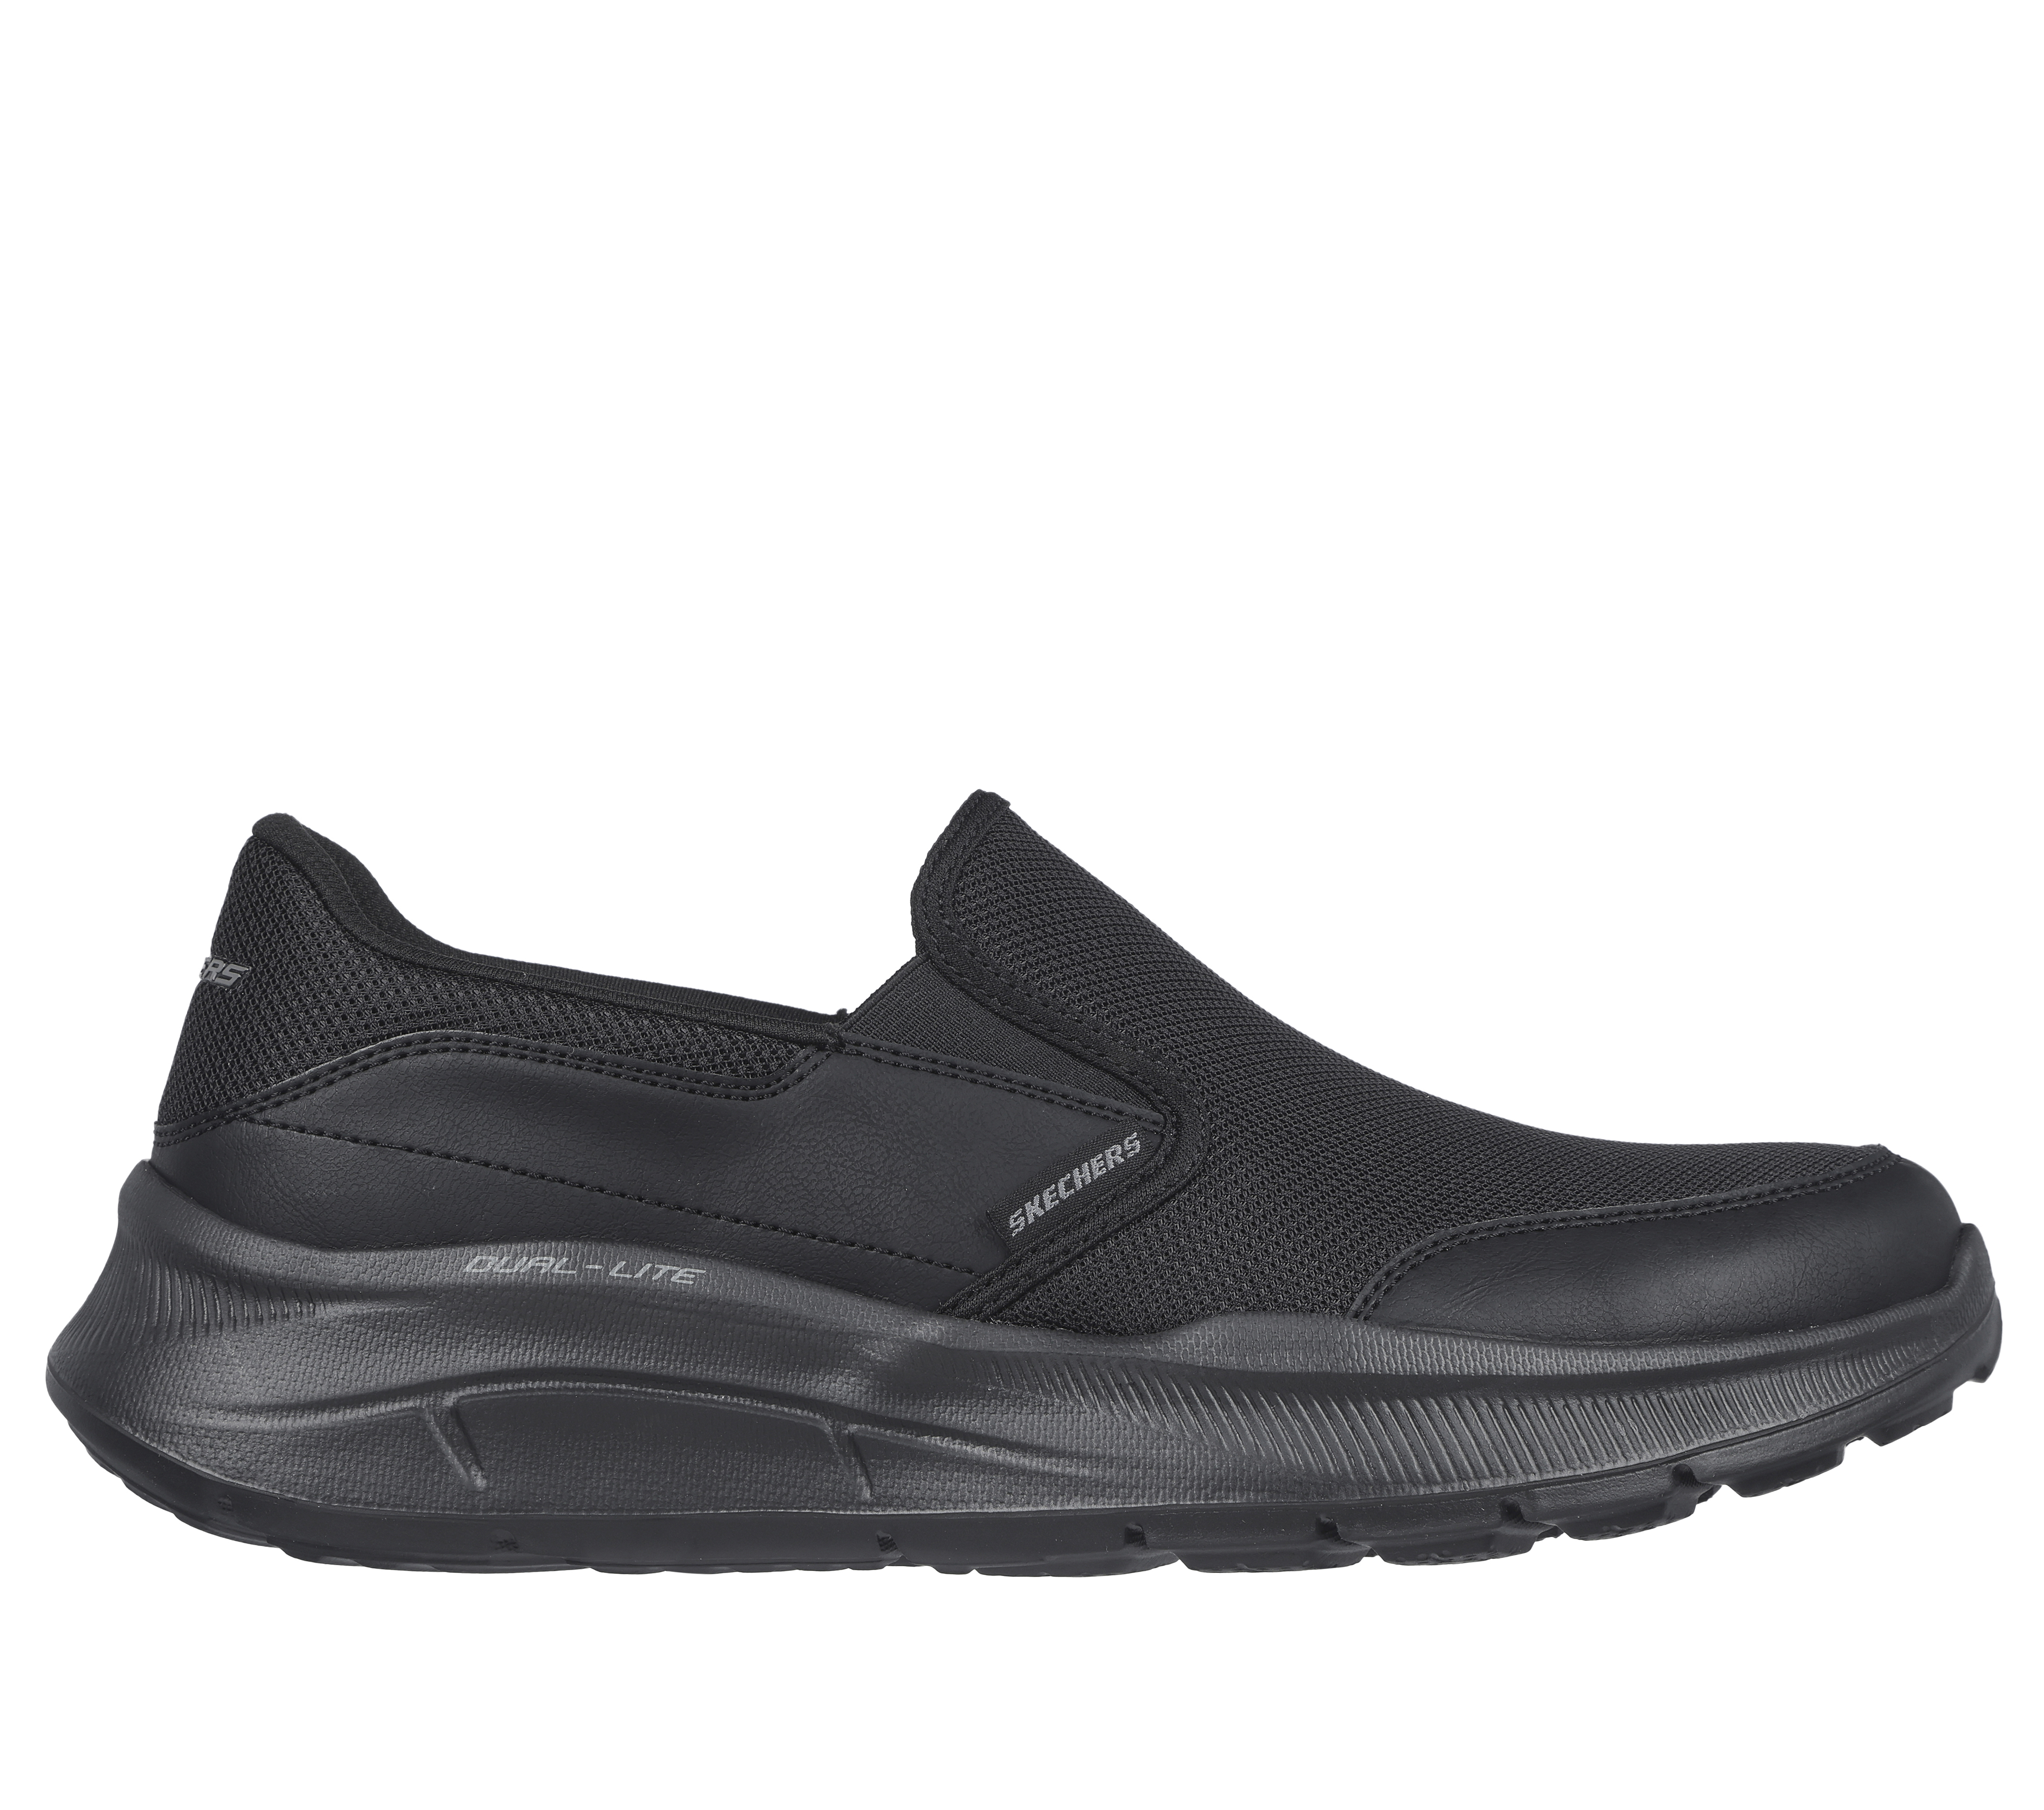 vídeo Consumir carrera Relaxed Fit: Equalizer 5.0 - Persistable | SKECHERS